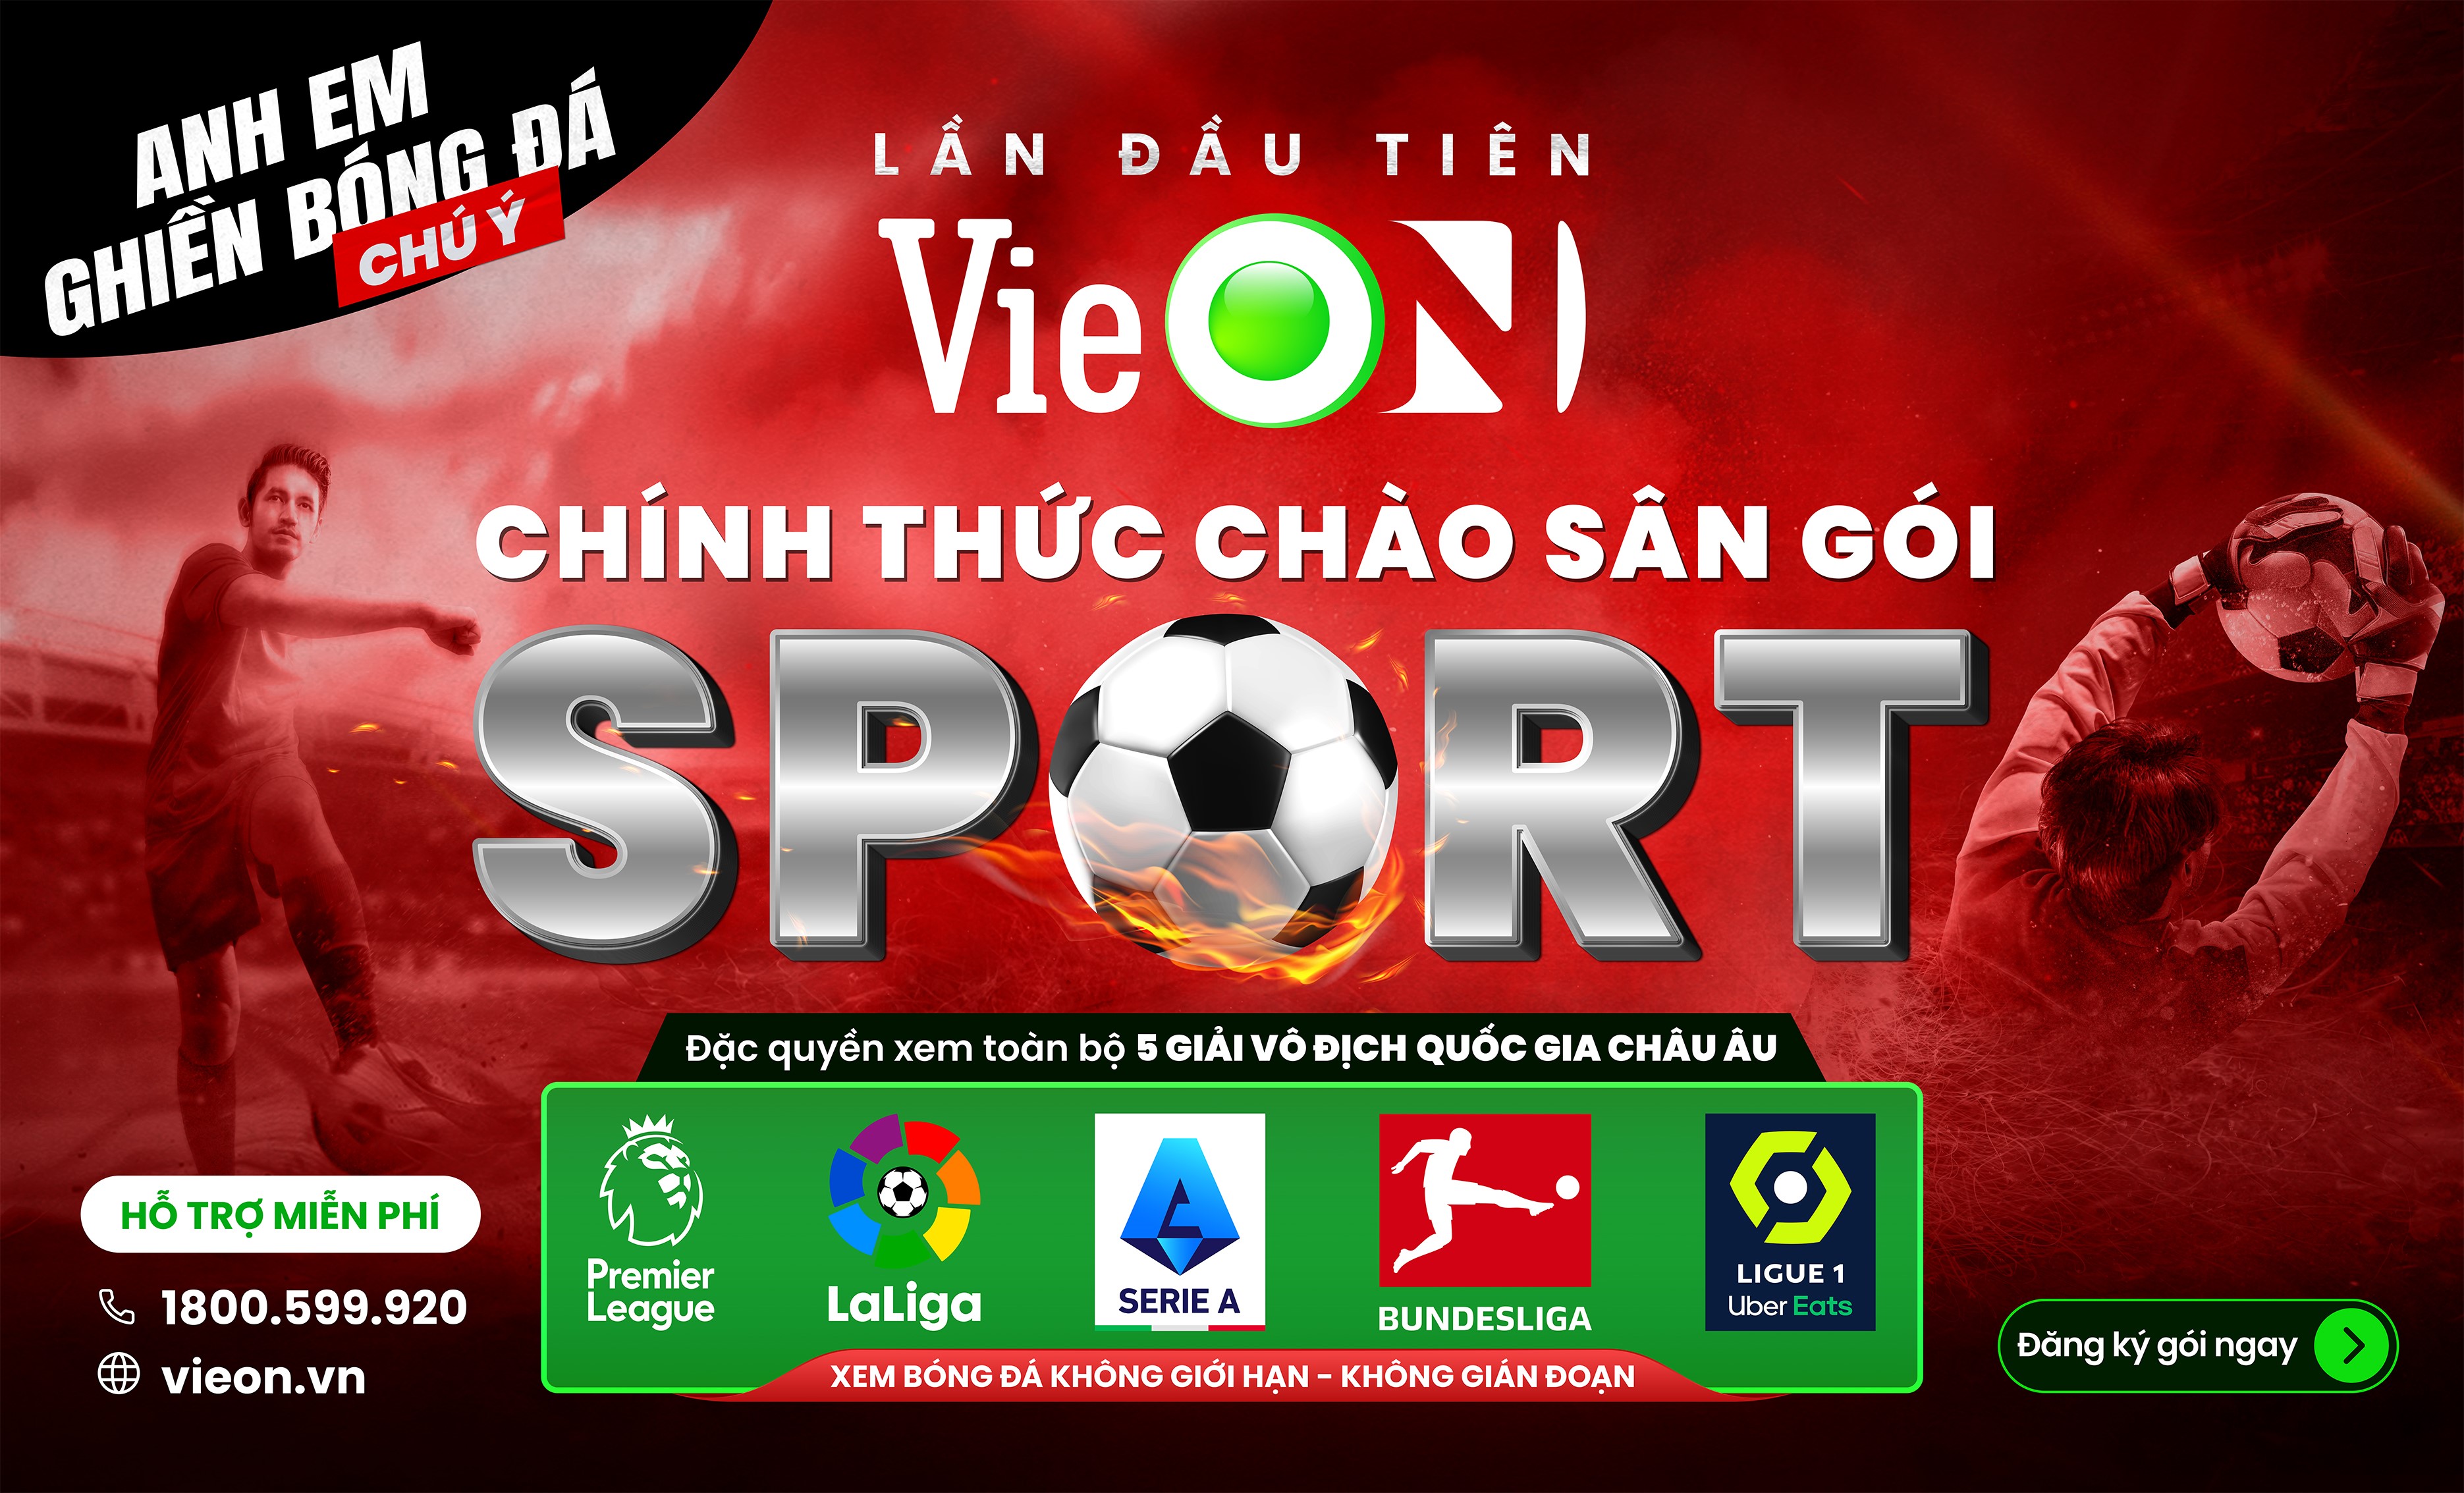 VieON’s Sport subscription package